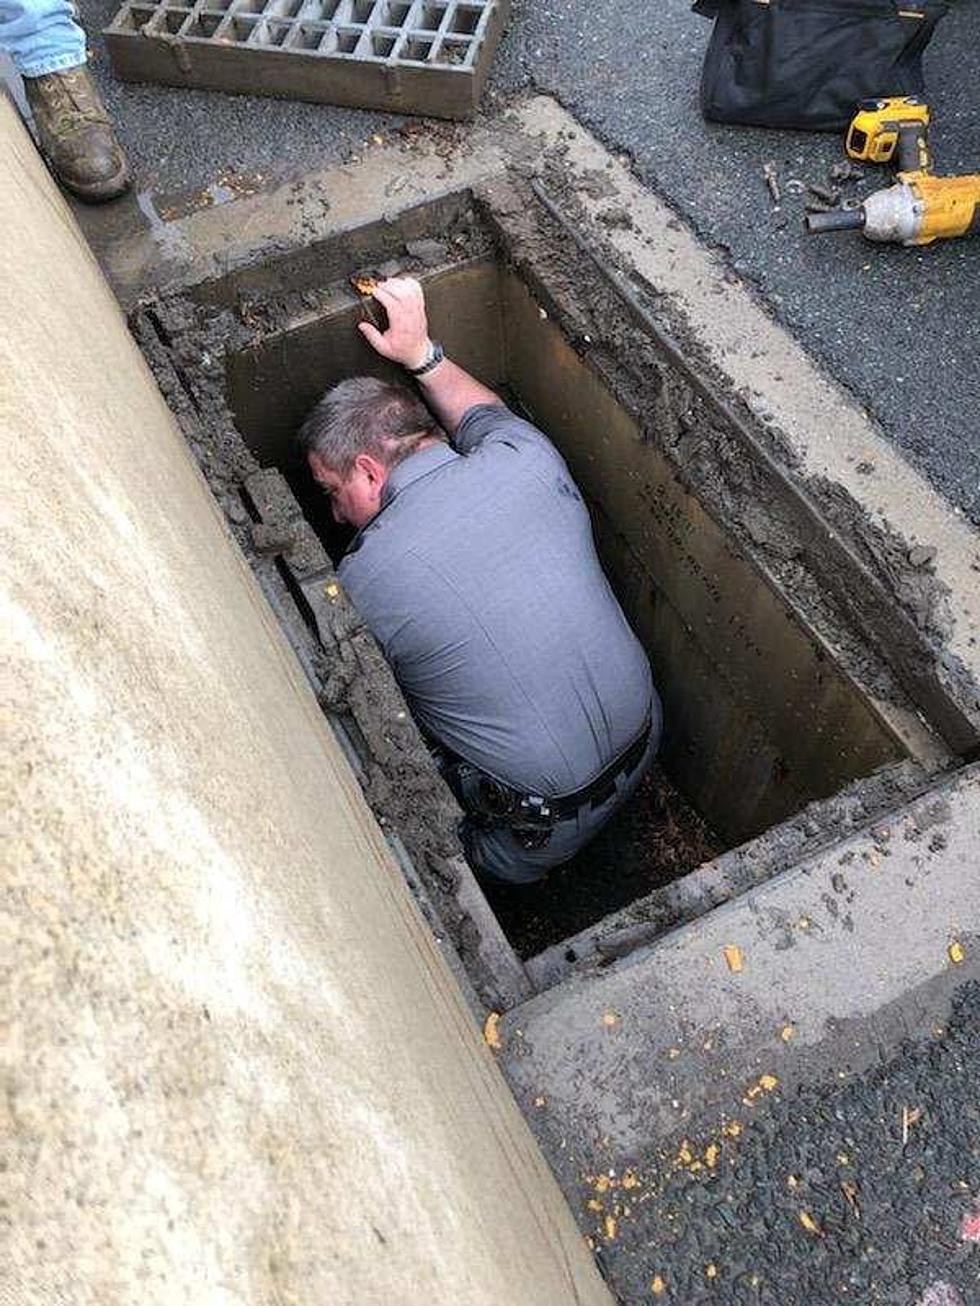 NYS Troopers Rescue Ducklings Trapped in Drain